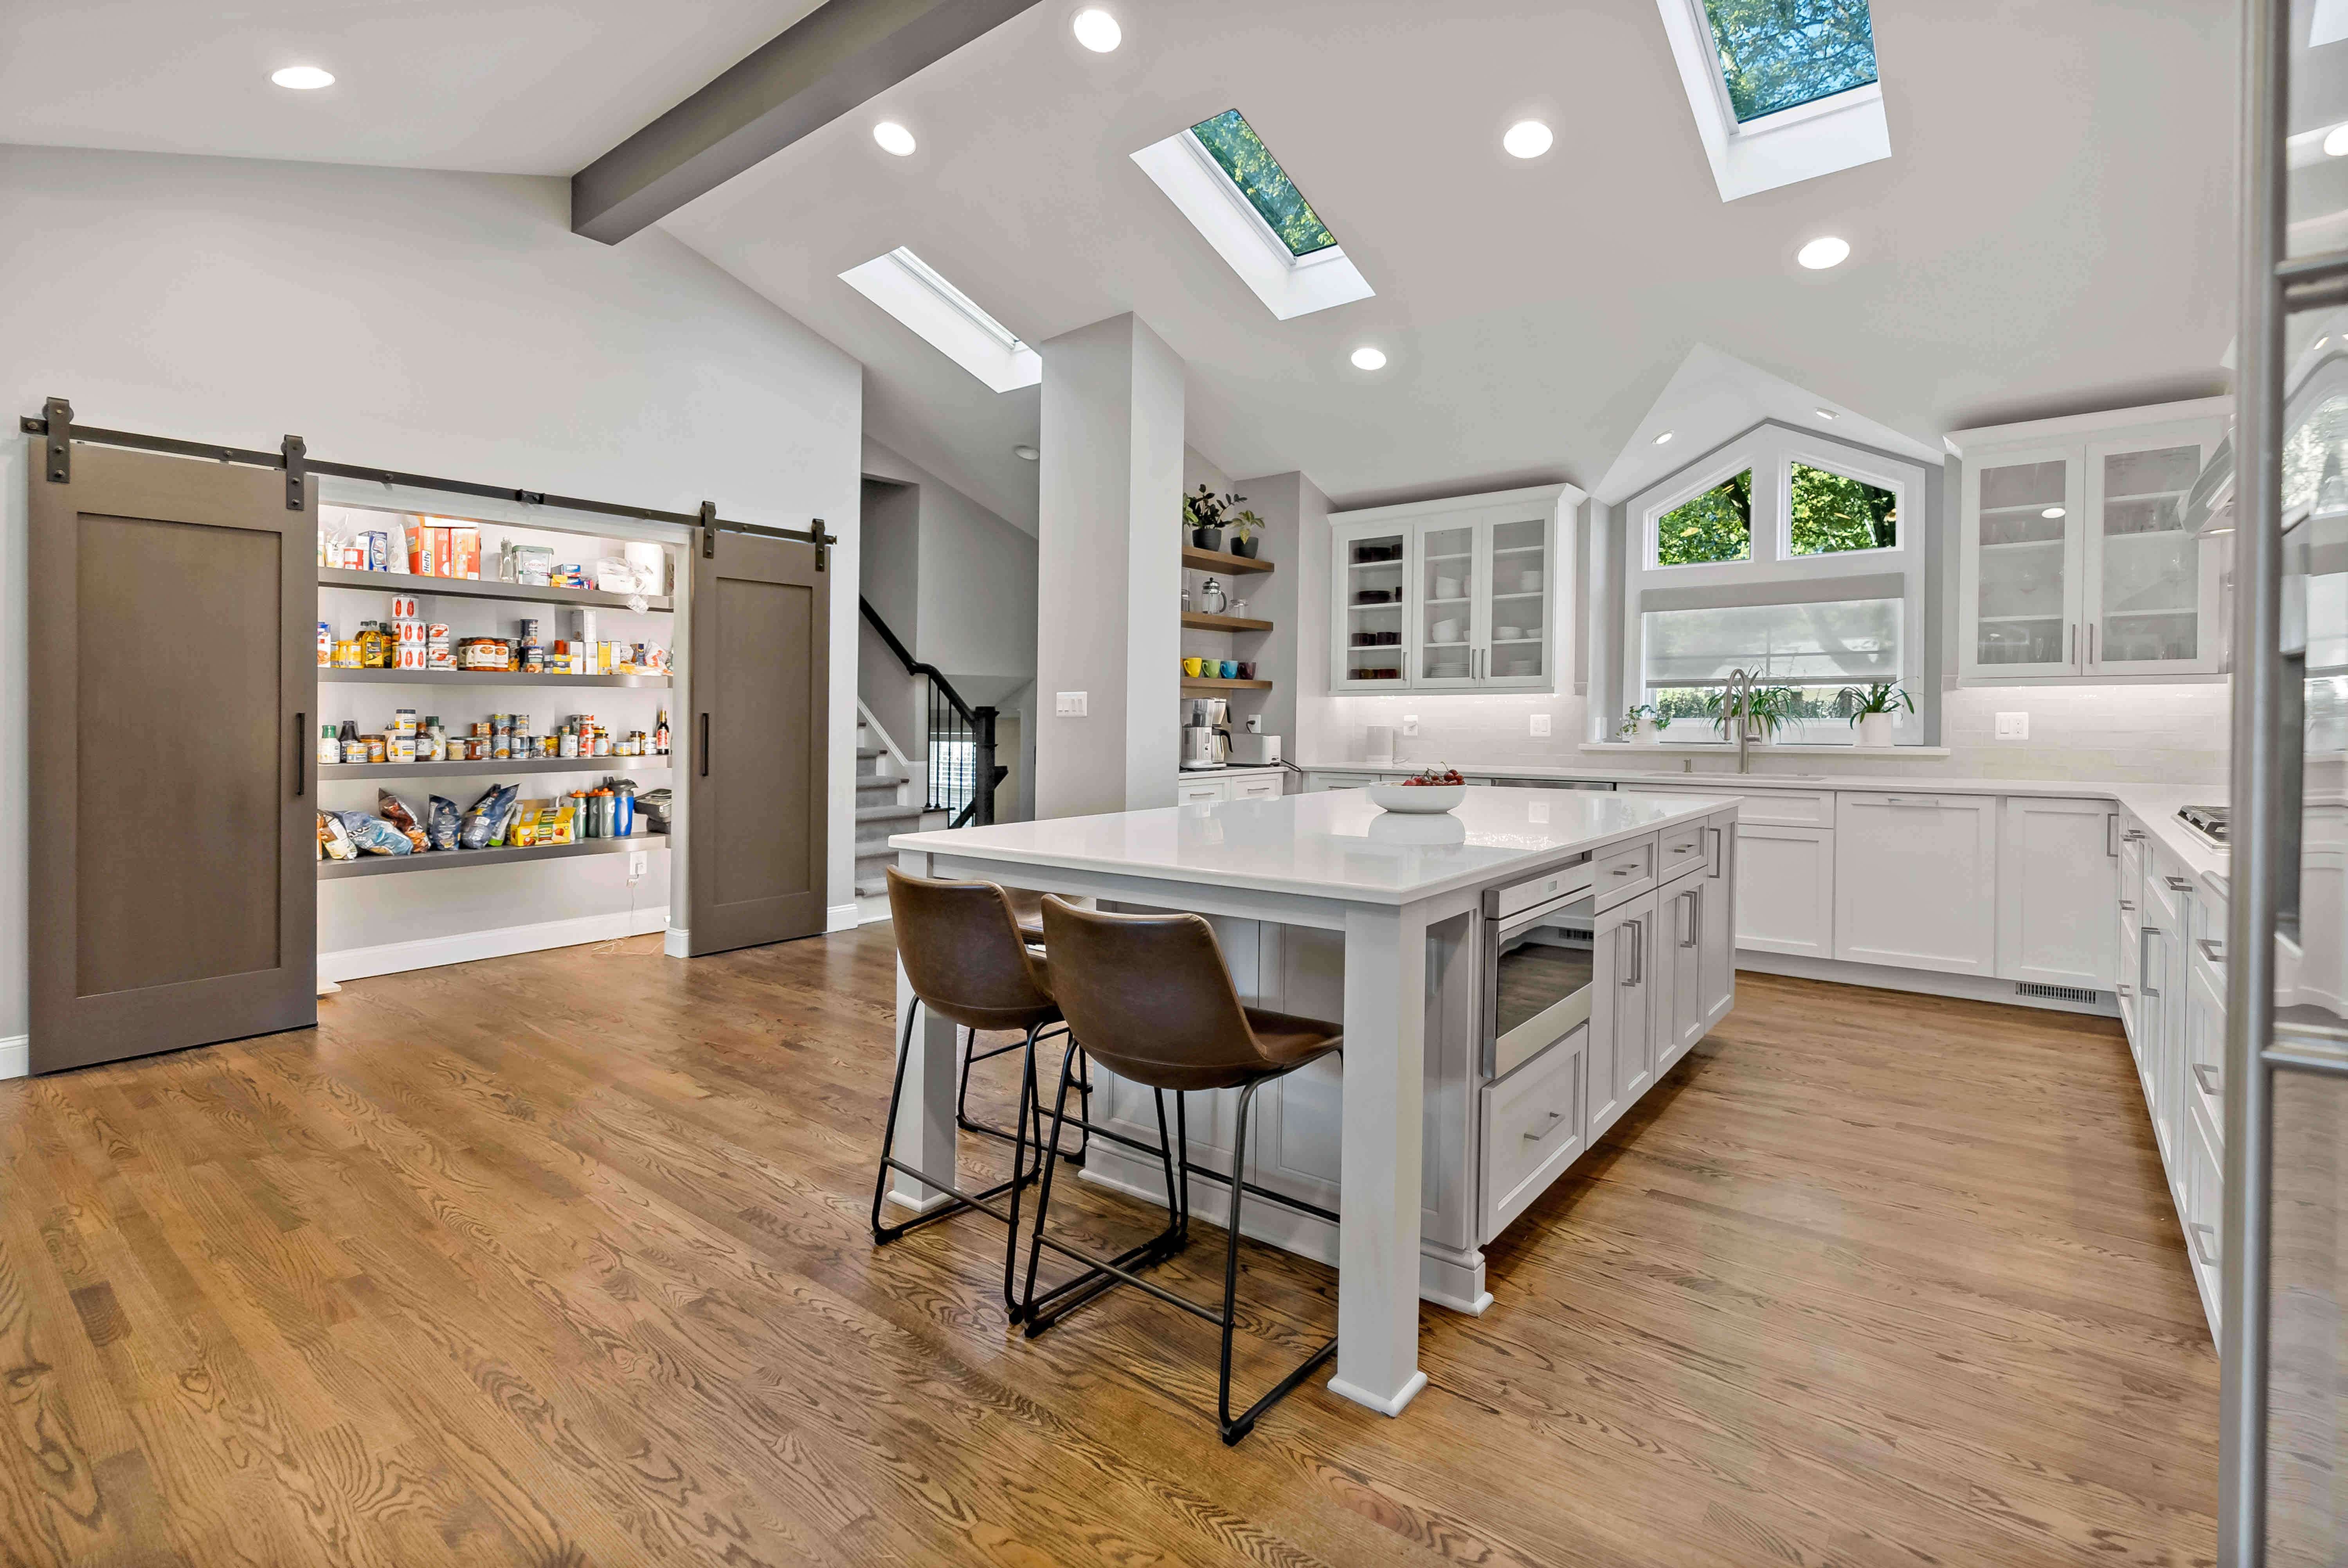 Large open kitchen with cathedral ceiling and skylights